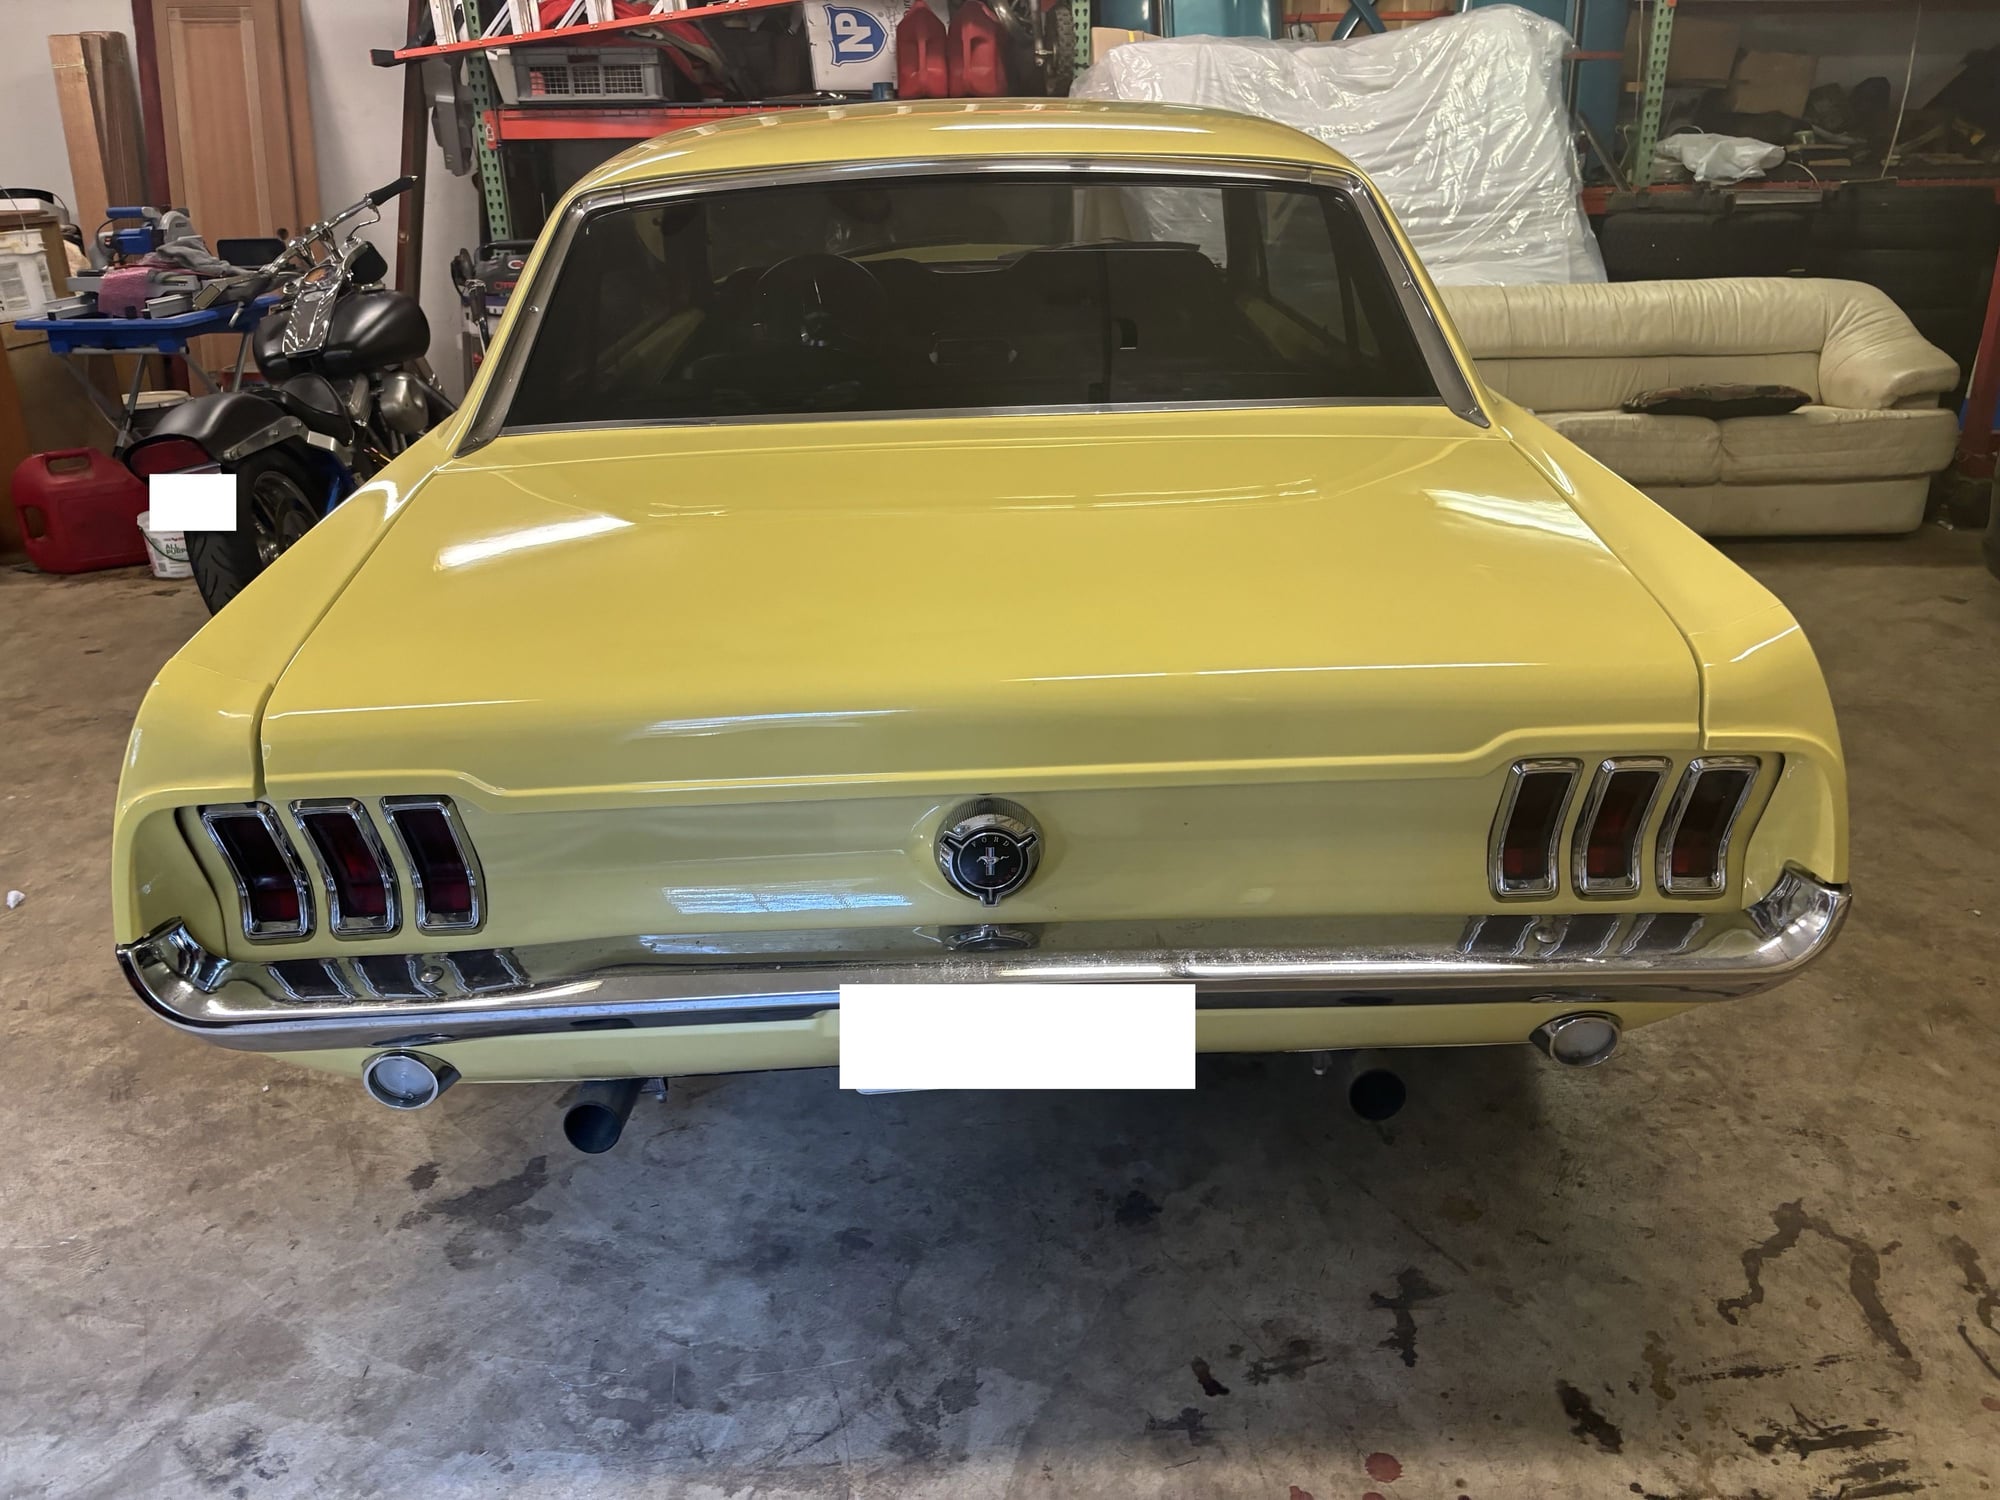 1967 Ford Mustang - 1967 Ford Mustang Coupe - Used - VIN 7T01T154660 - 20,000 Miles - 8 cyl - 2WD - Manual - Coupe - Yellow - Newburg, MD 20664, United States